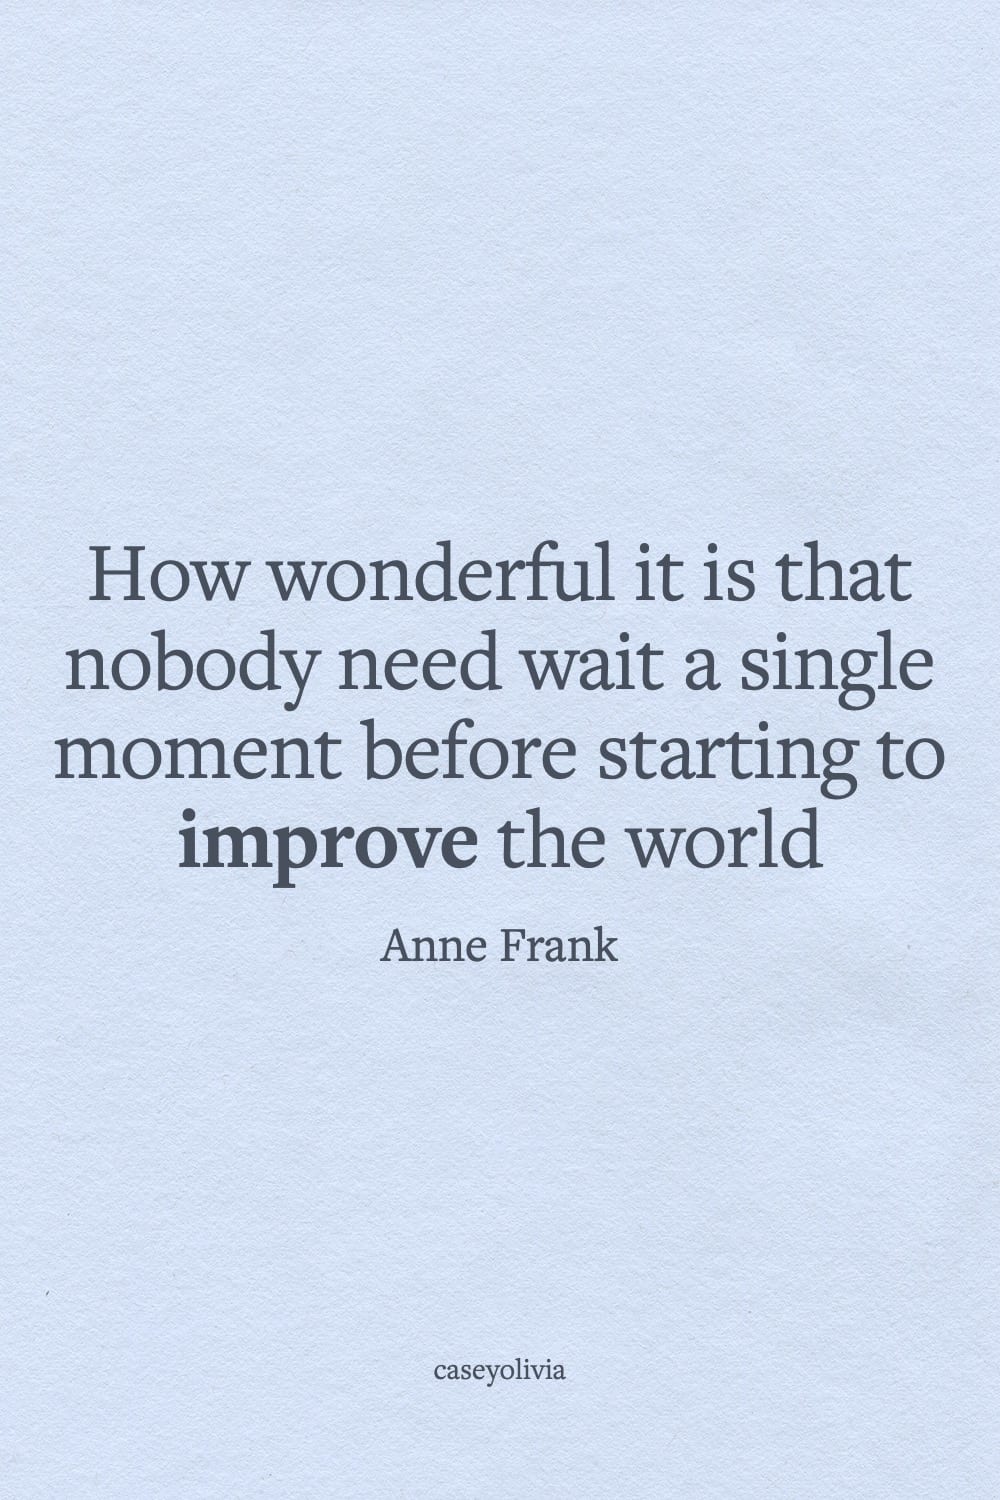 improving the world anne frank quotation